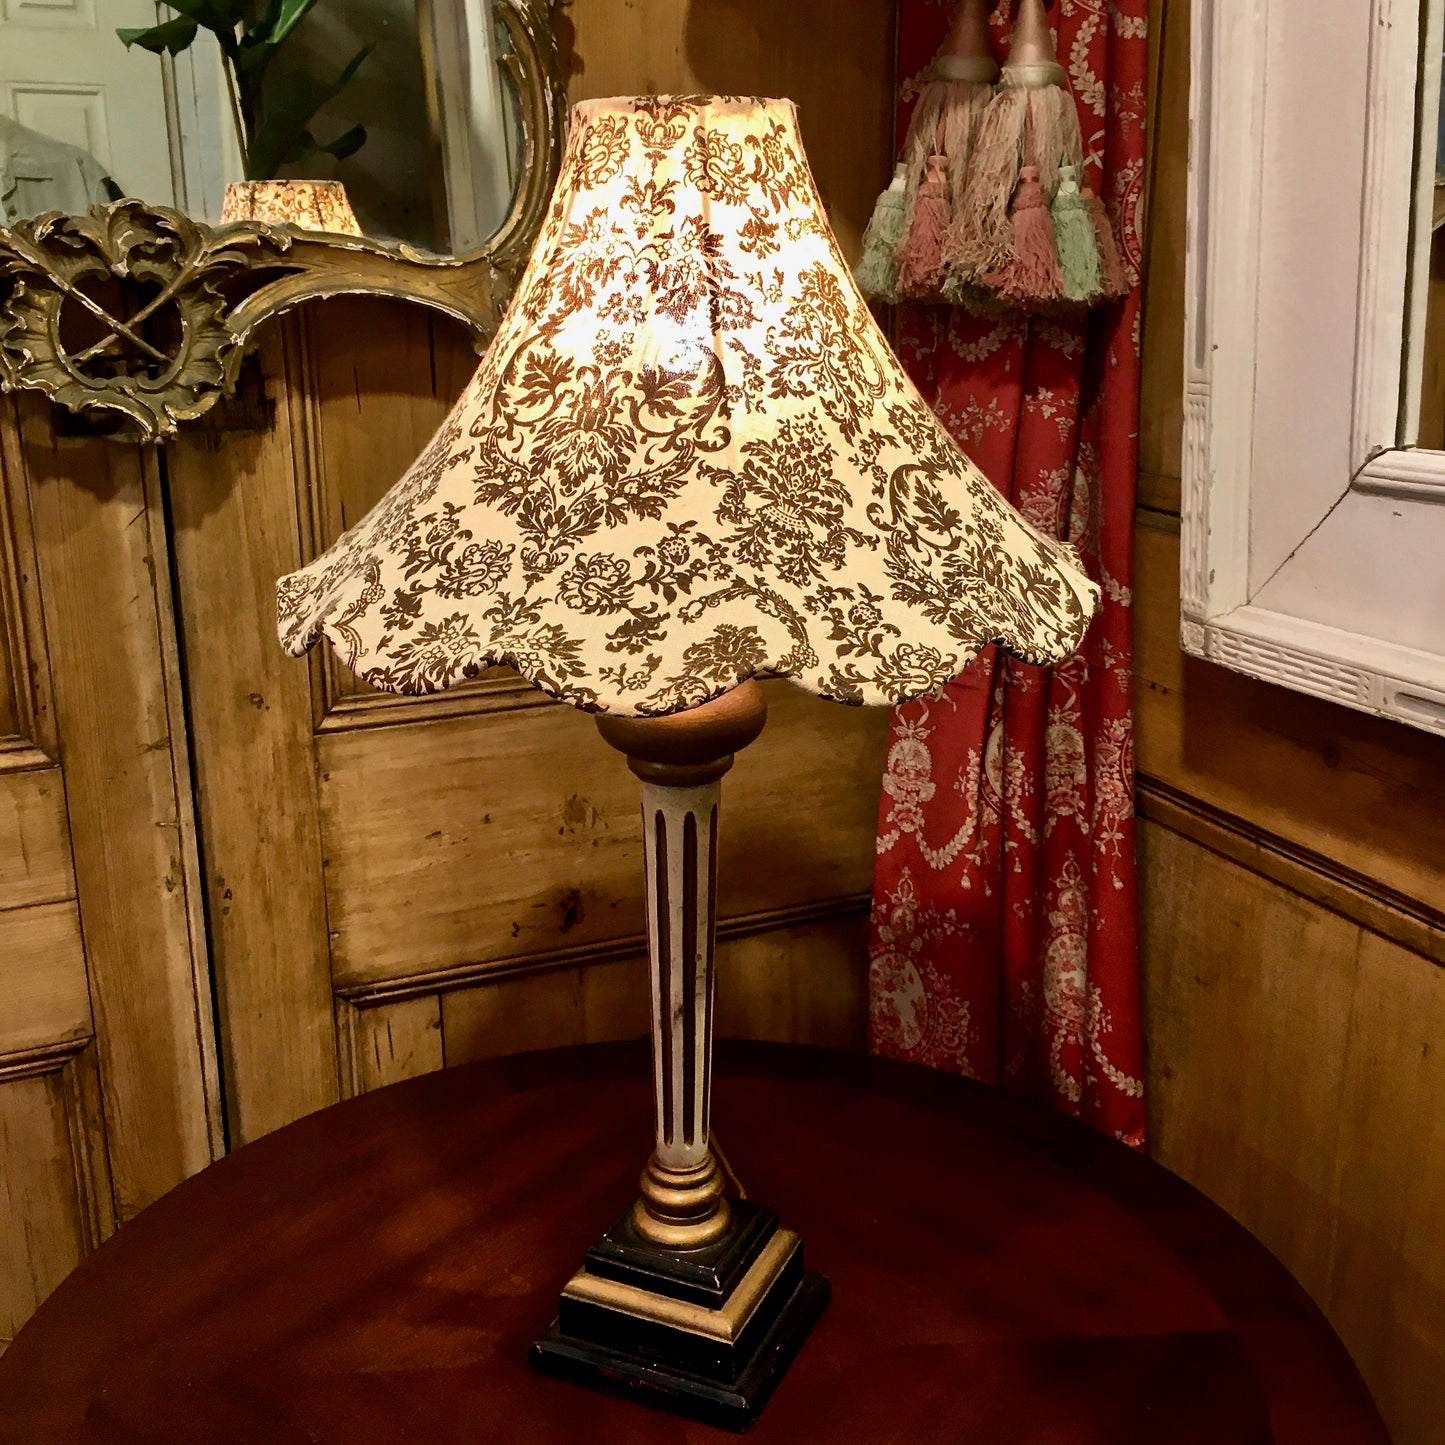 ORIGINAL FLUTED TABLE LAMP - NOW SOLD